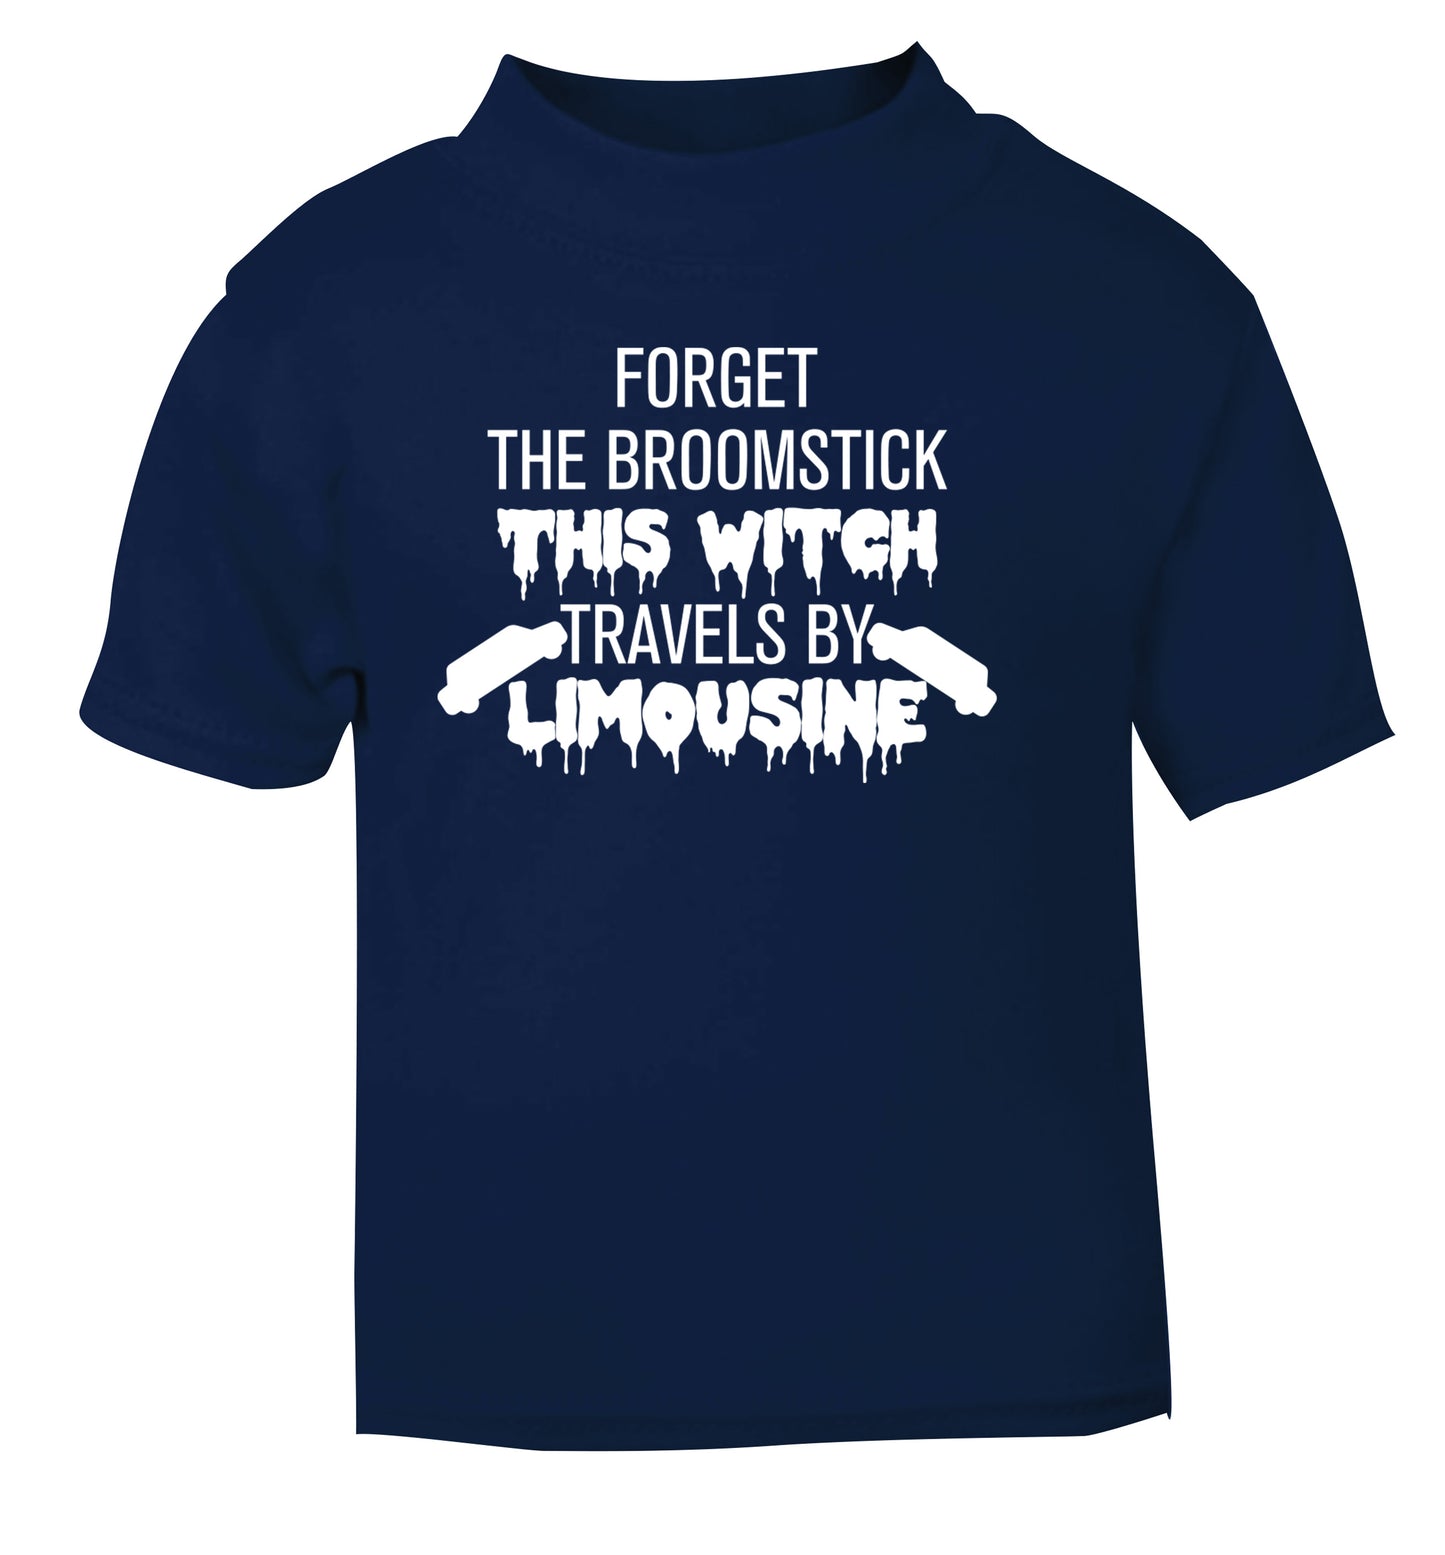 Forget the broomstick this witch travels by limousine navy Baby Toddler Tshirt 2 Years